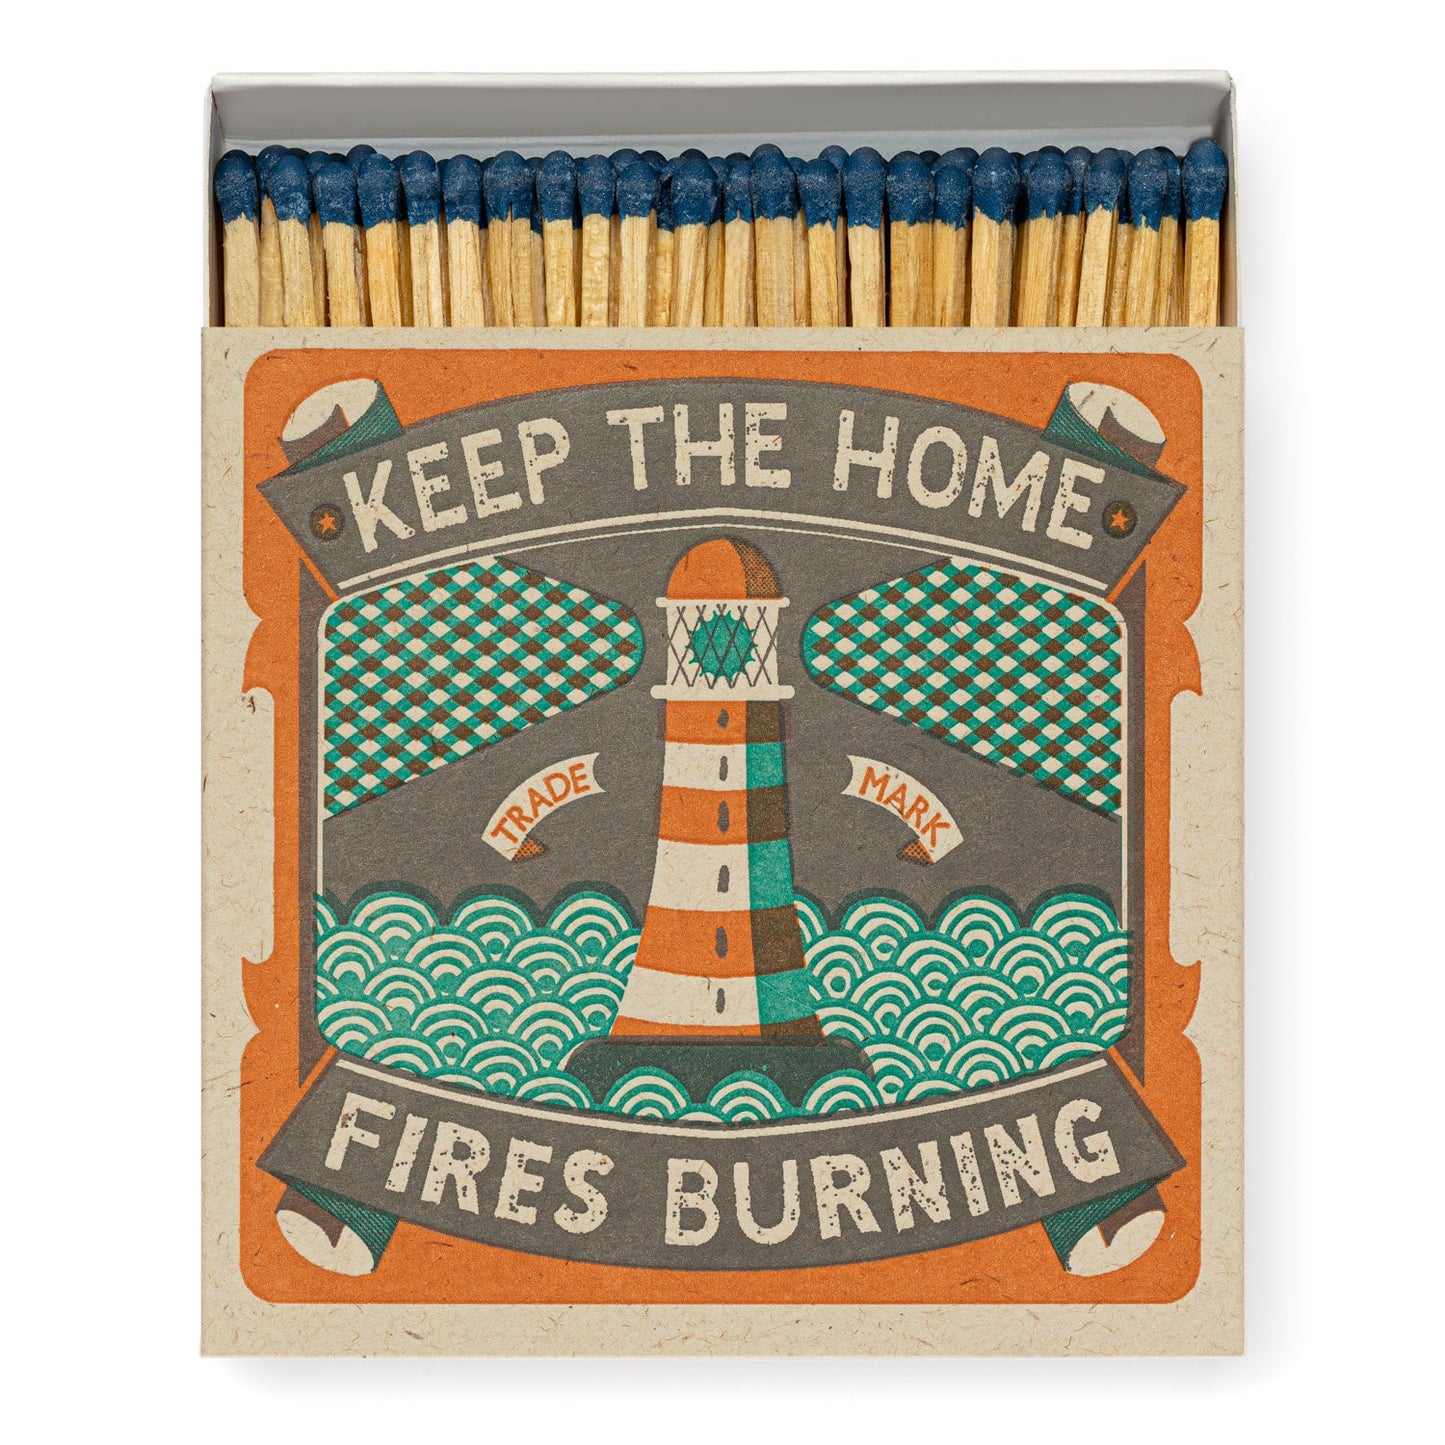 Boxed Matches - Home Fires Rosemary & Ridgway